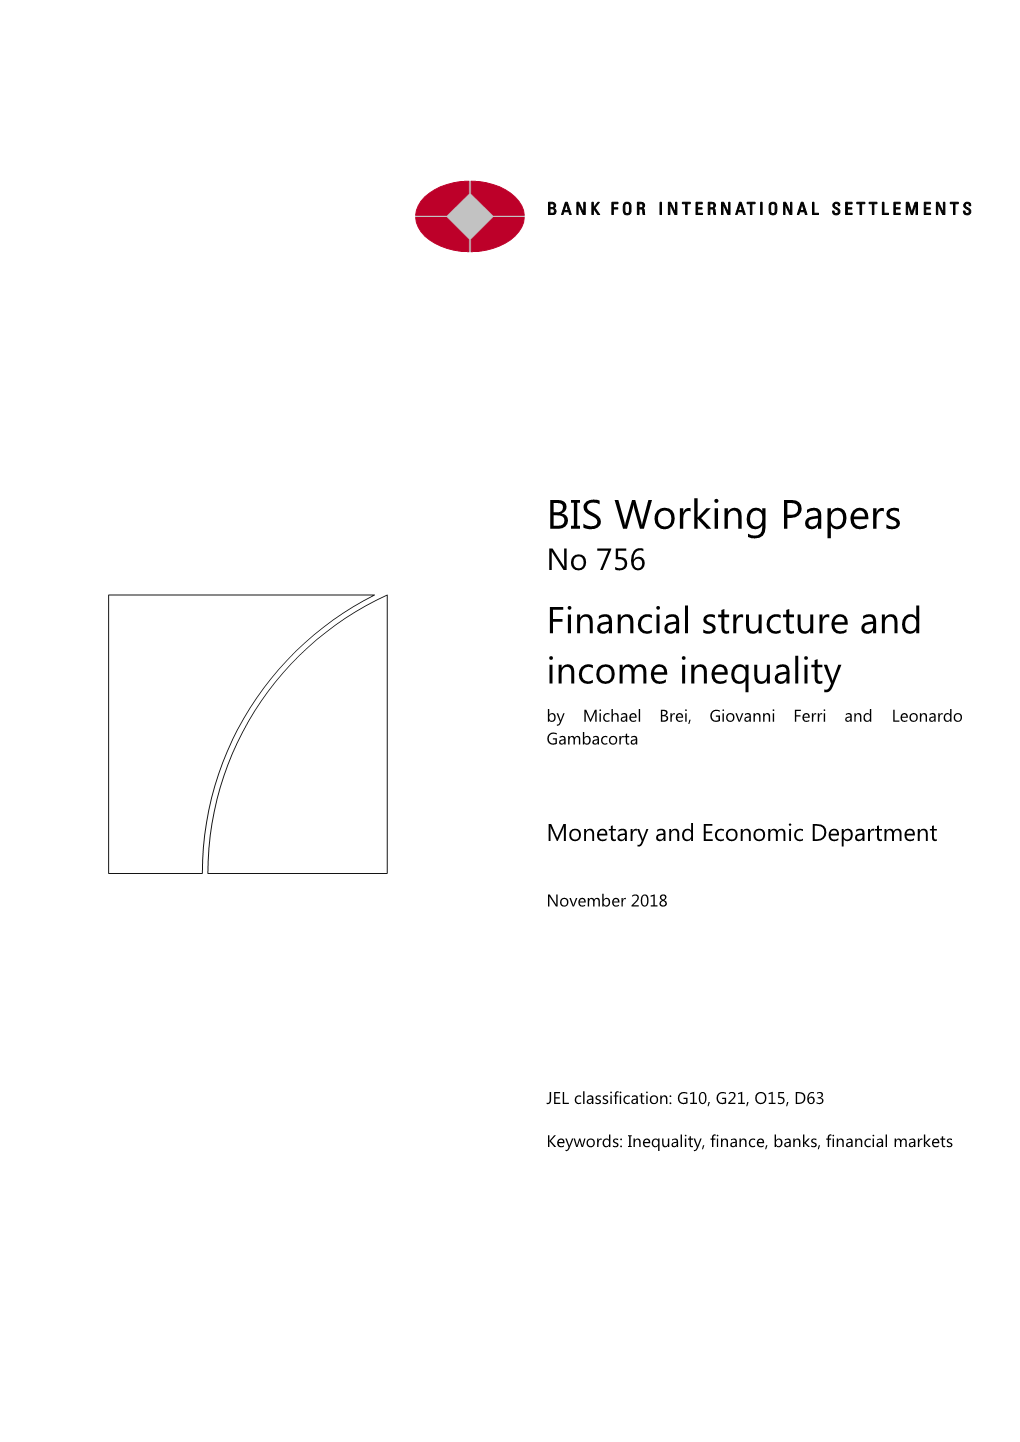 Financial Structure and Income Inequality by Michael Brei, Giovanni Ferri and Leonardo Gambacorta